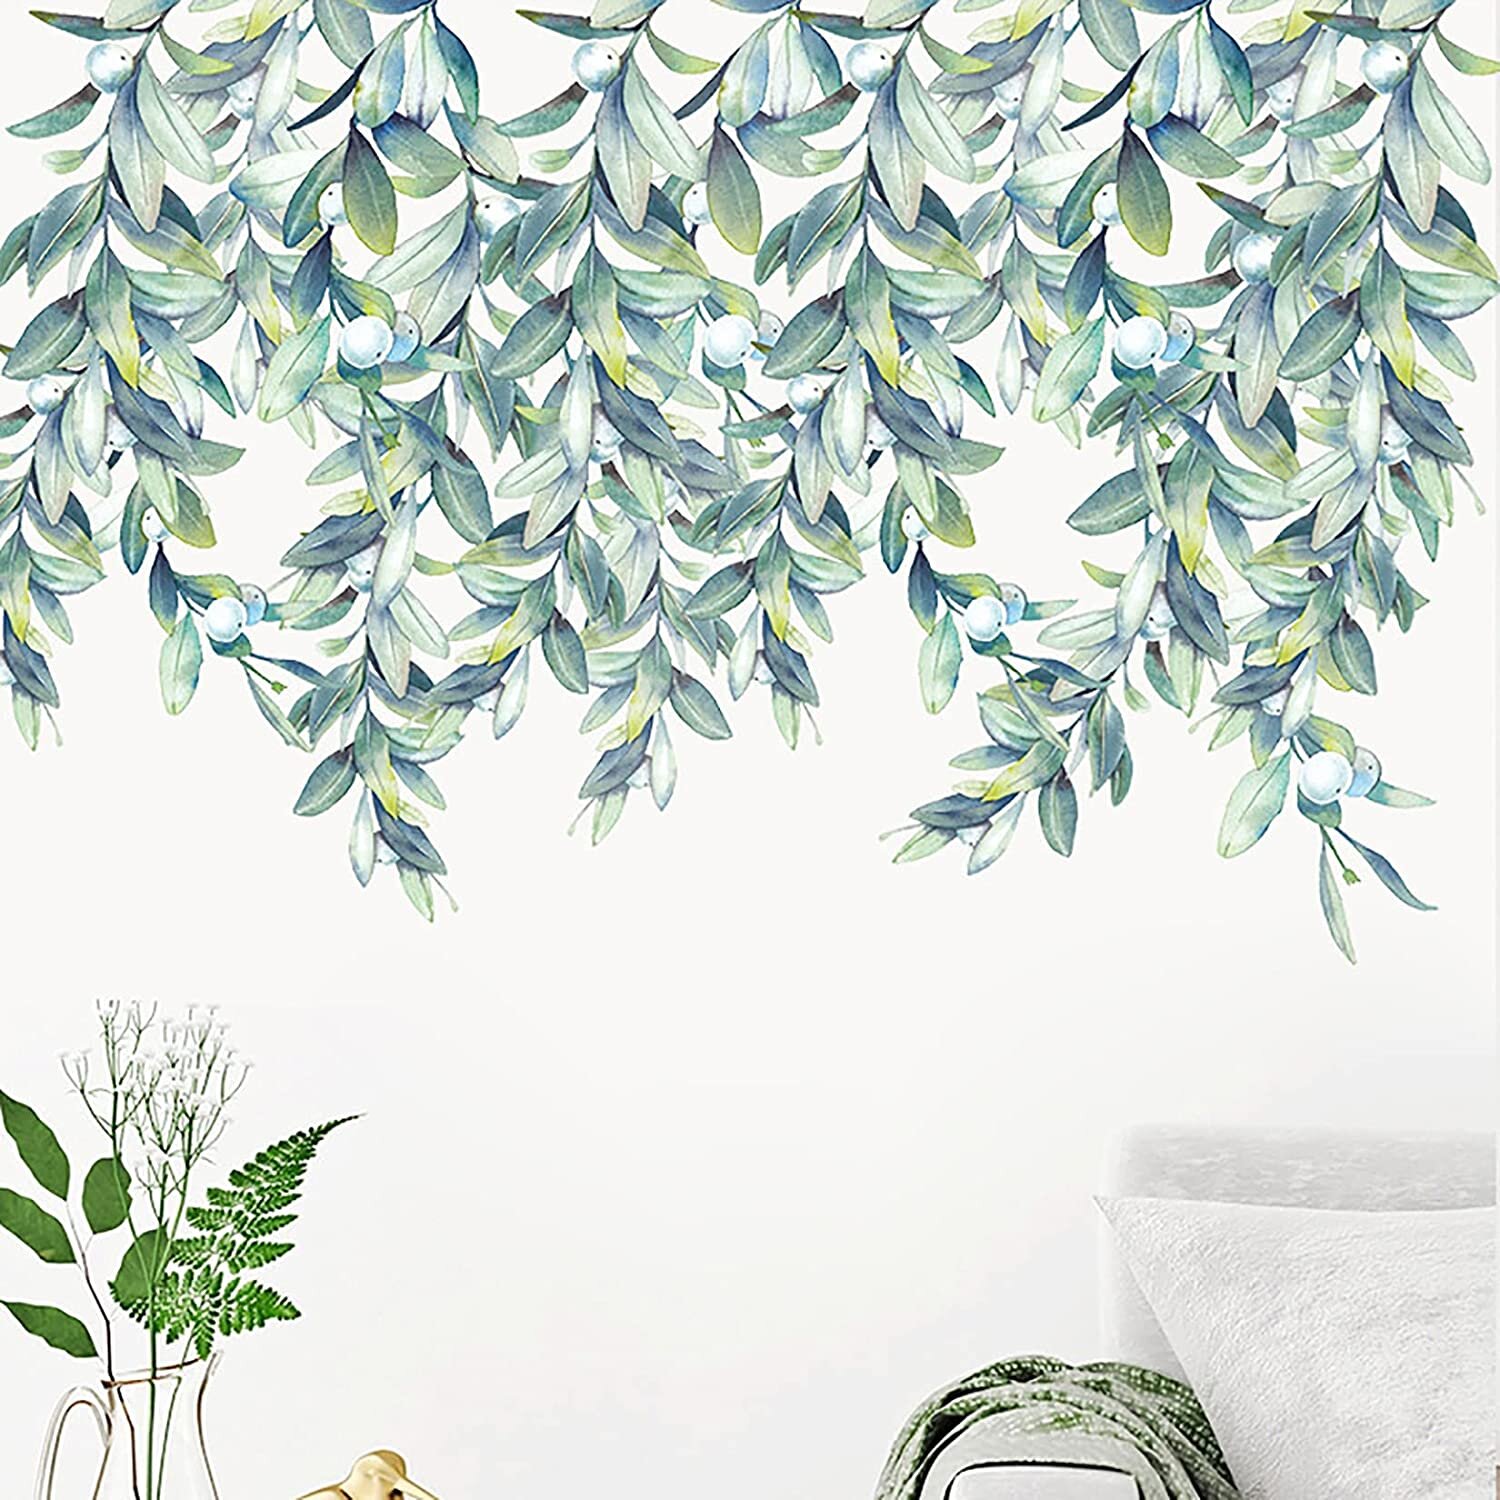 Home Decor Removable Sticker 66"x96", Green Vines Draping-2 Wall Mural 